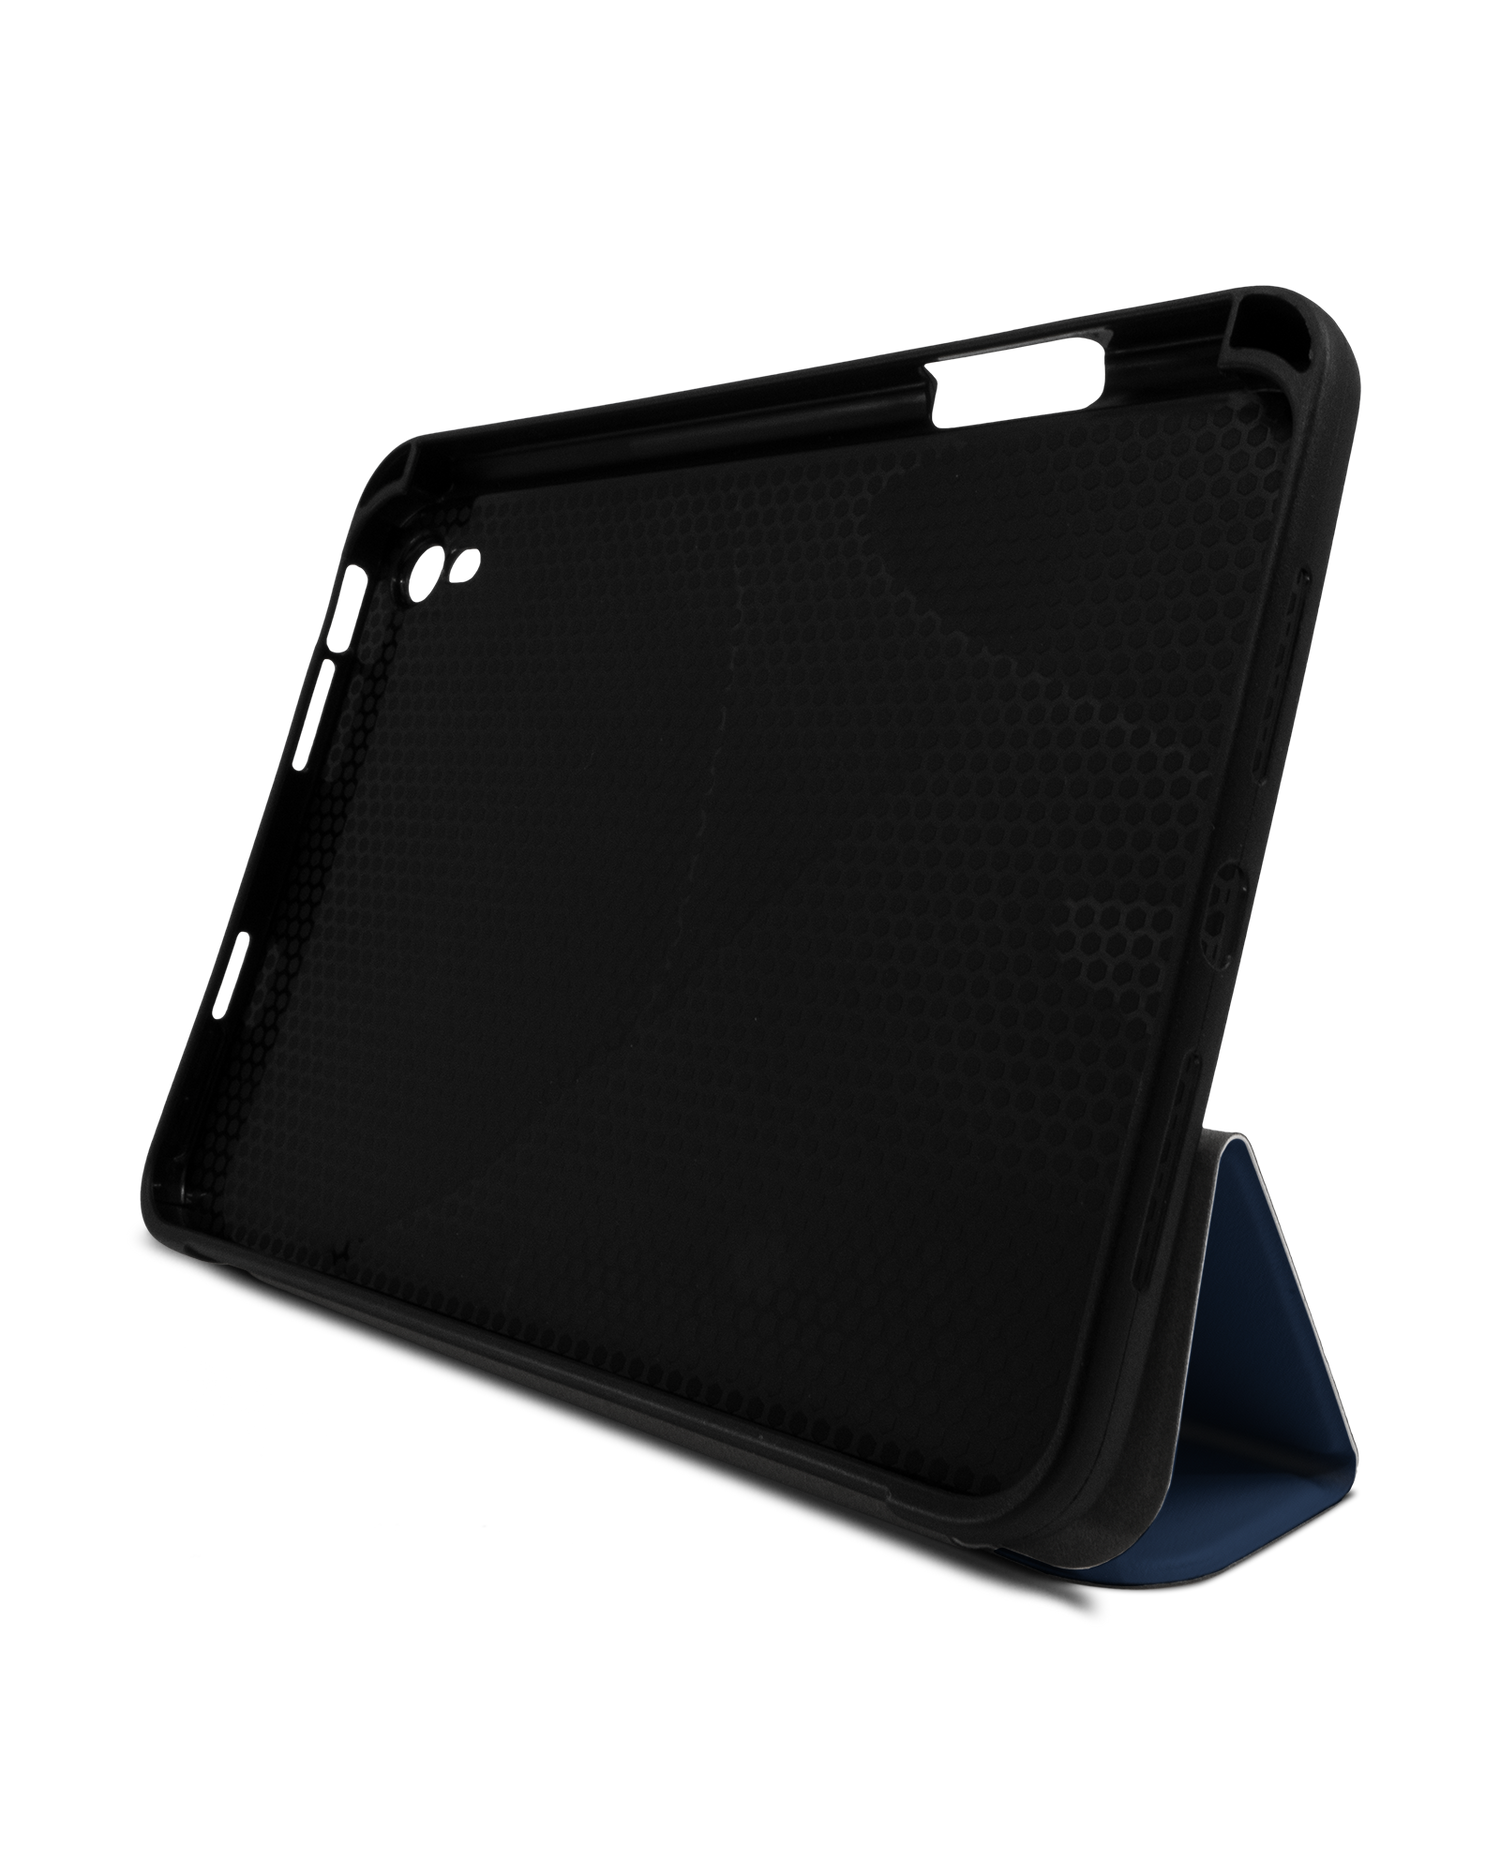 NAVY iPad Case with Pencil Holder Apple iPad mini 6 (2021): Set up in landscape format (front view)